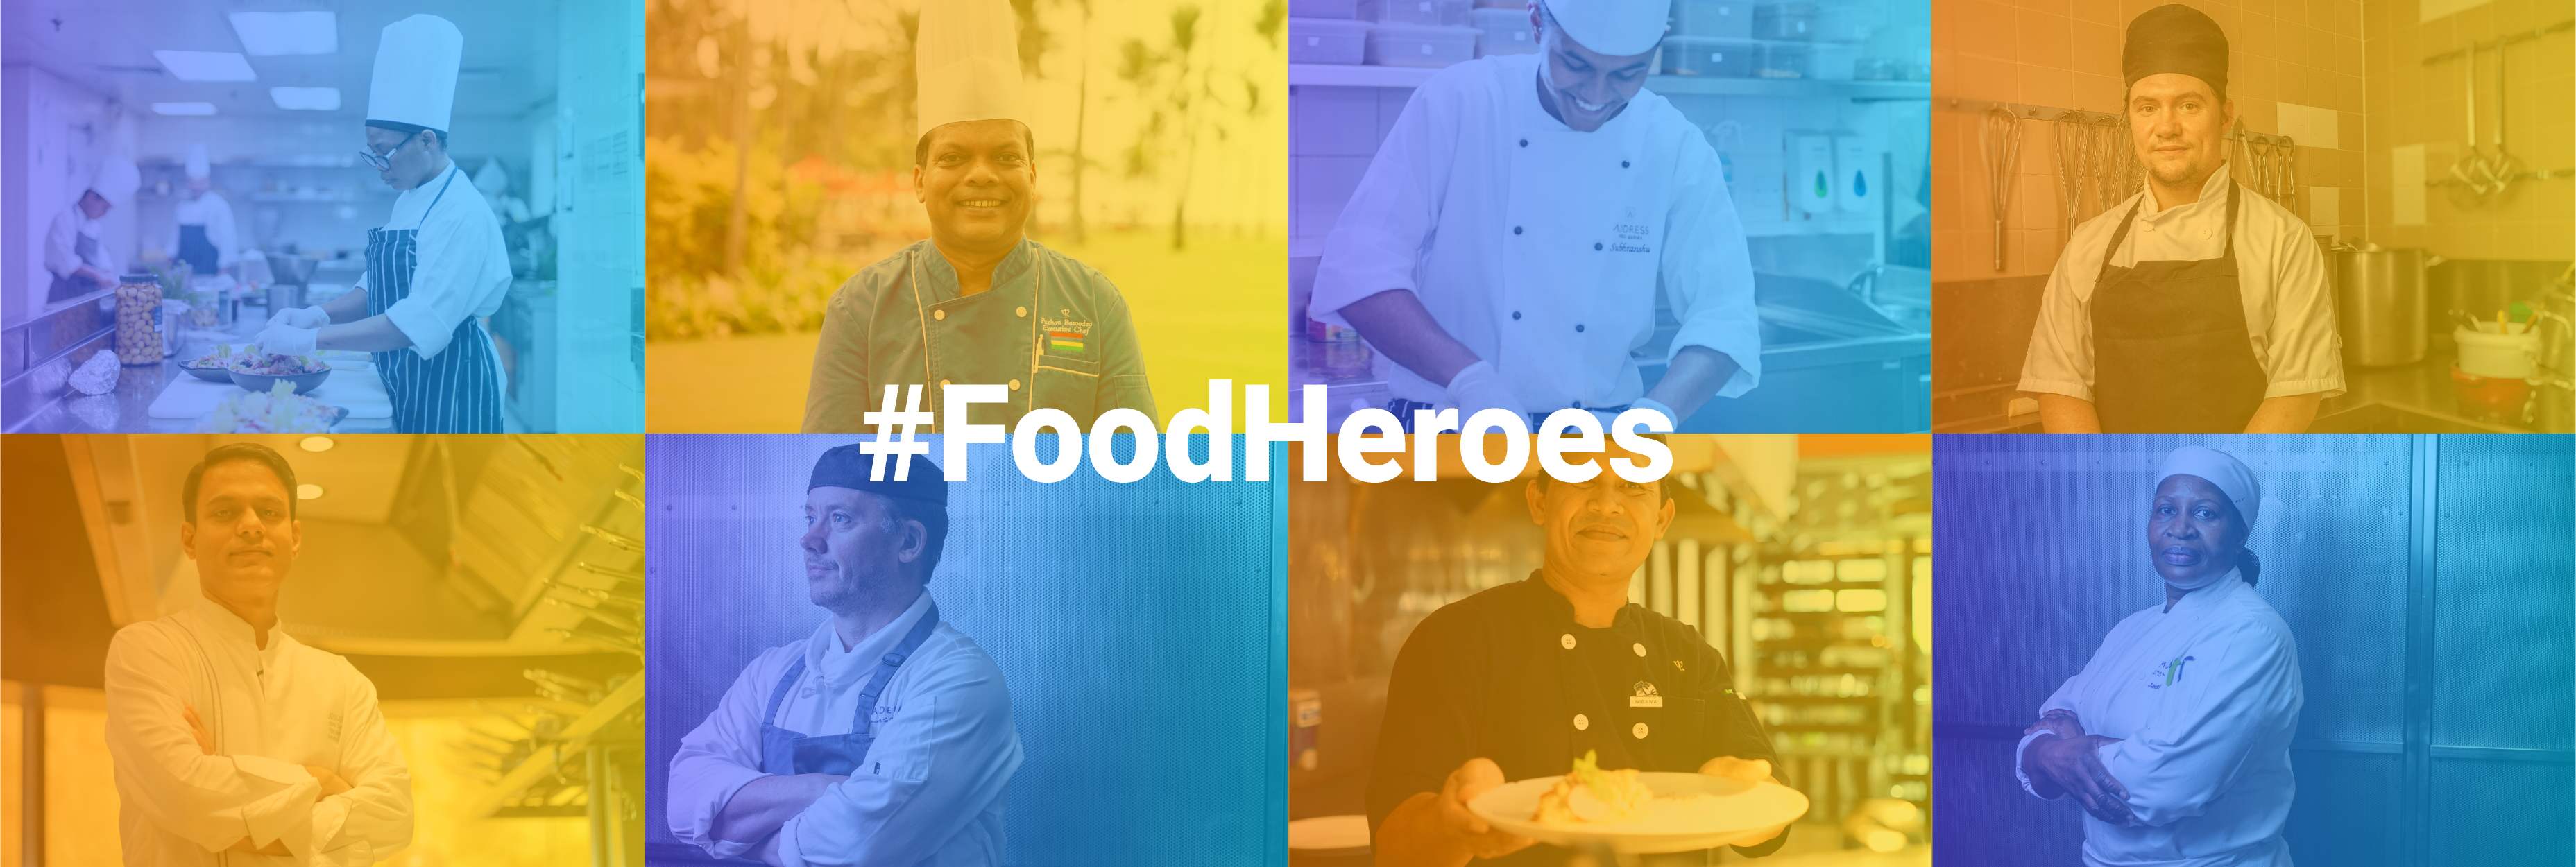 Winnow Celebrates Food Heroes Combating Waste on World Food Day